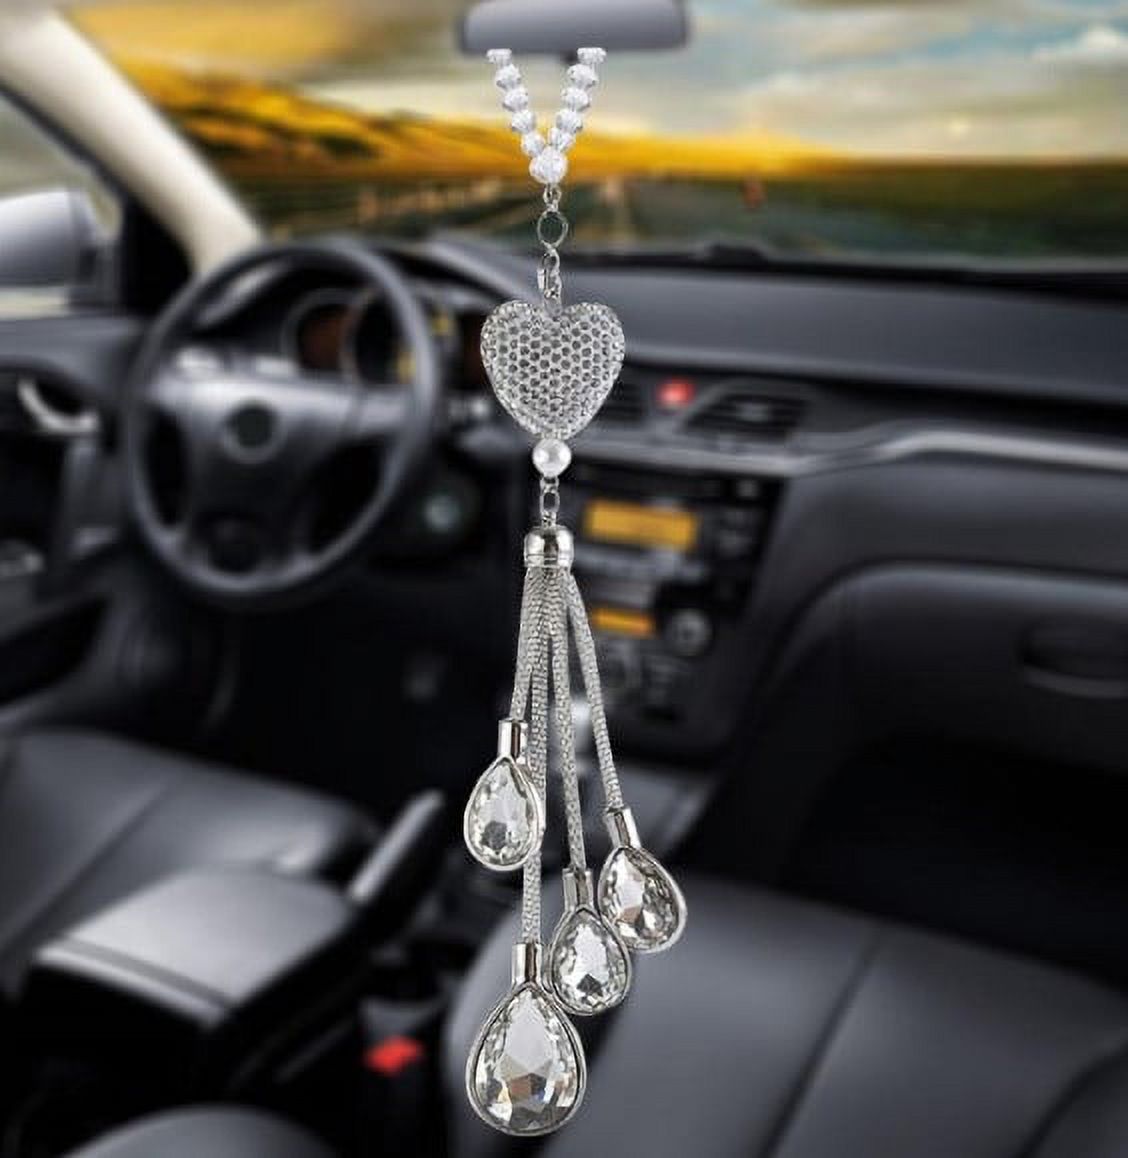 Taykoo Bling Car Accessories for Women,Diamond Crystal White Heart Car Rear  View Mirror Charms Prism Car Decoration Decor,Lucky Hanging Interior